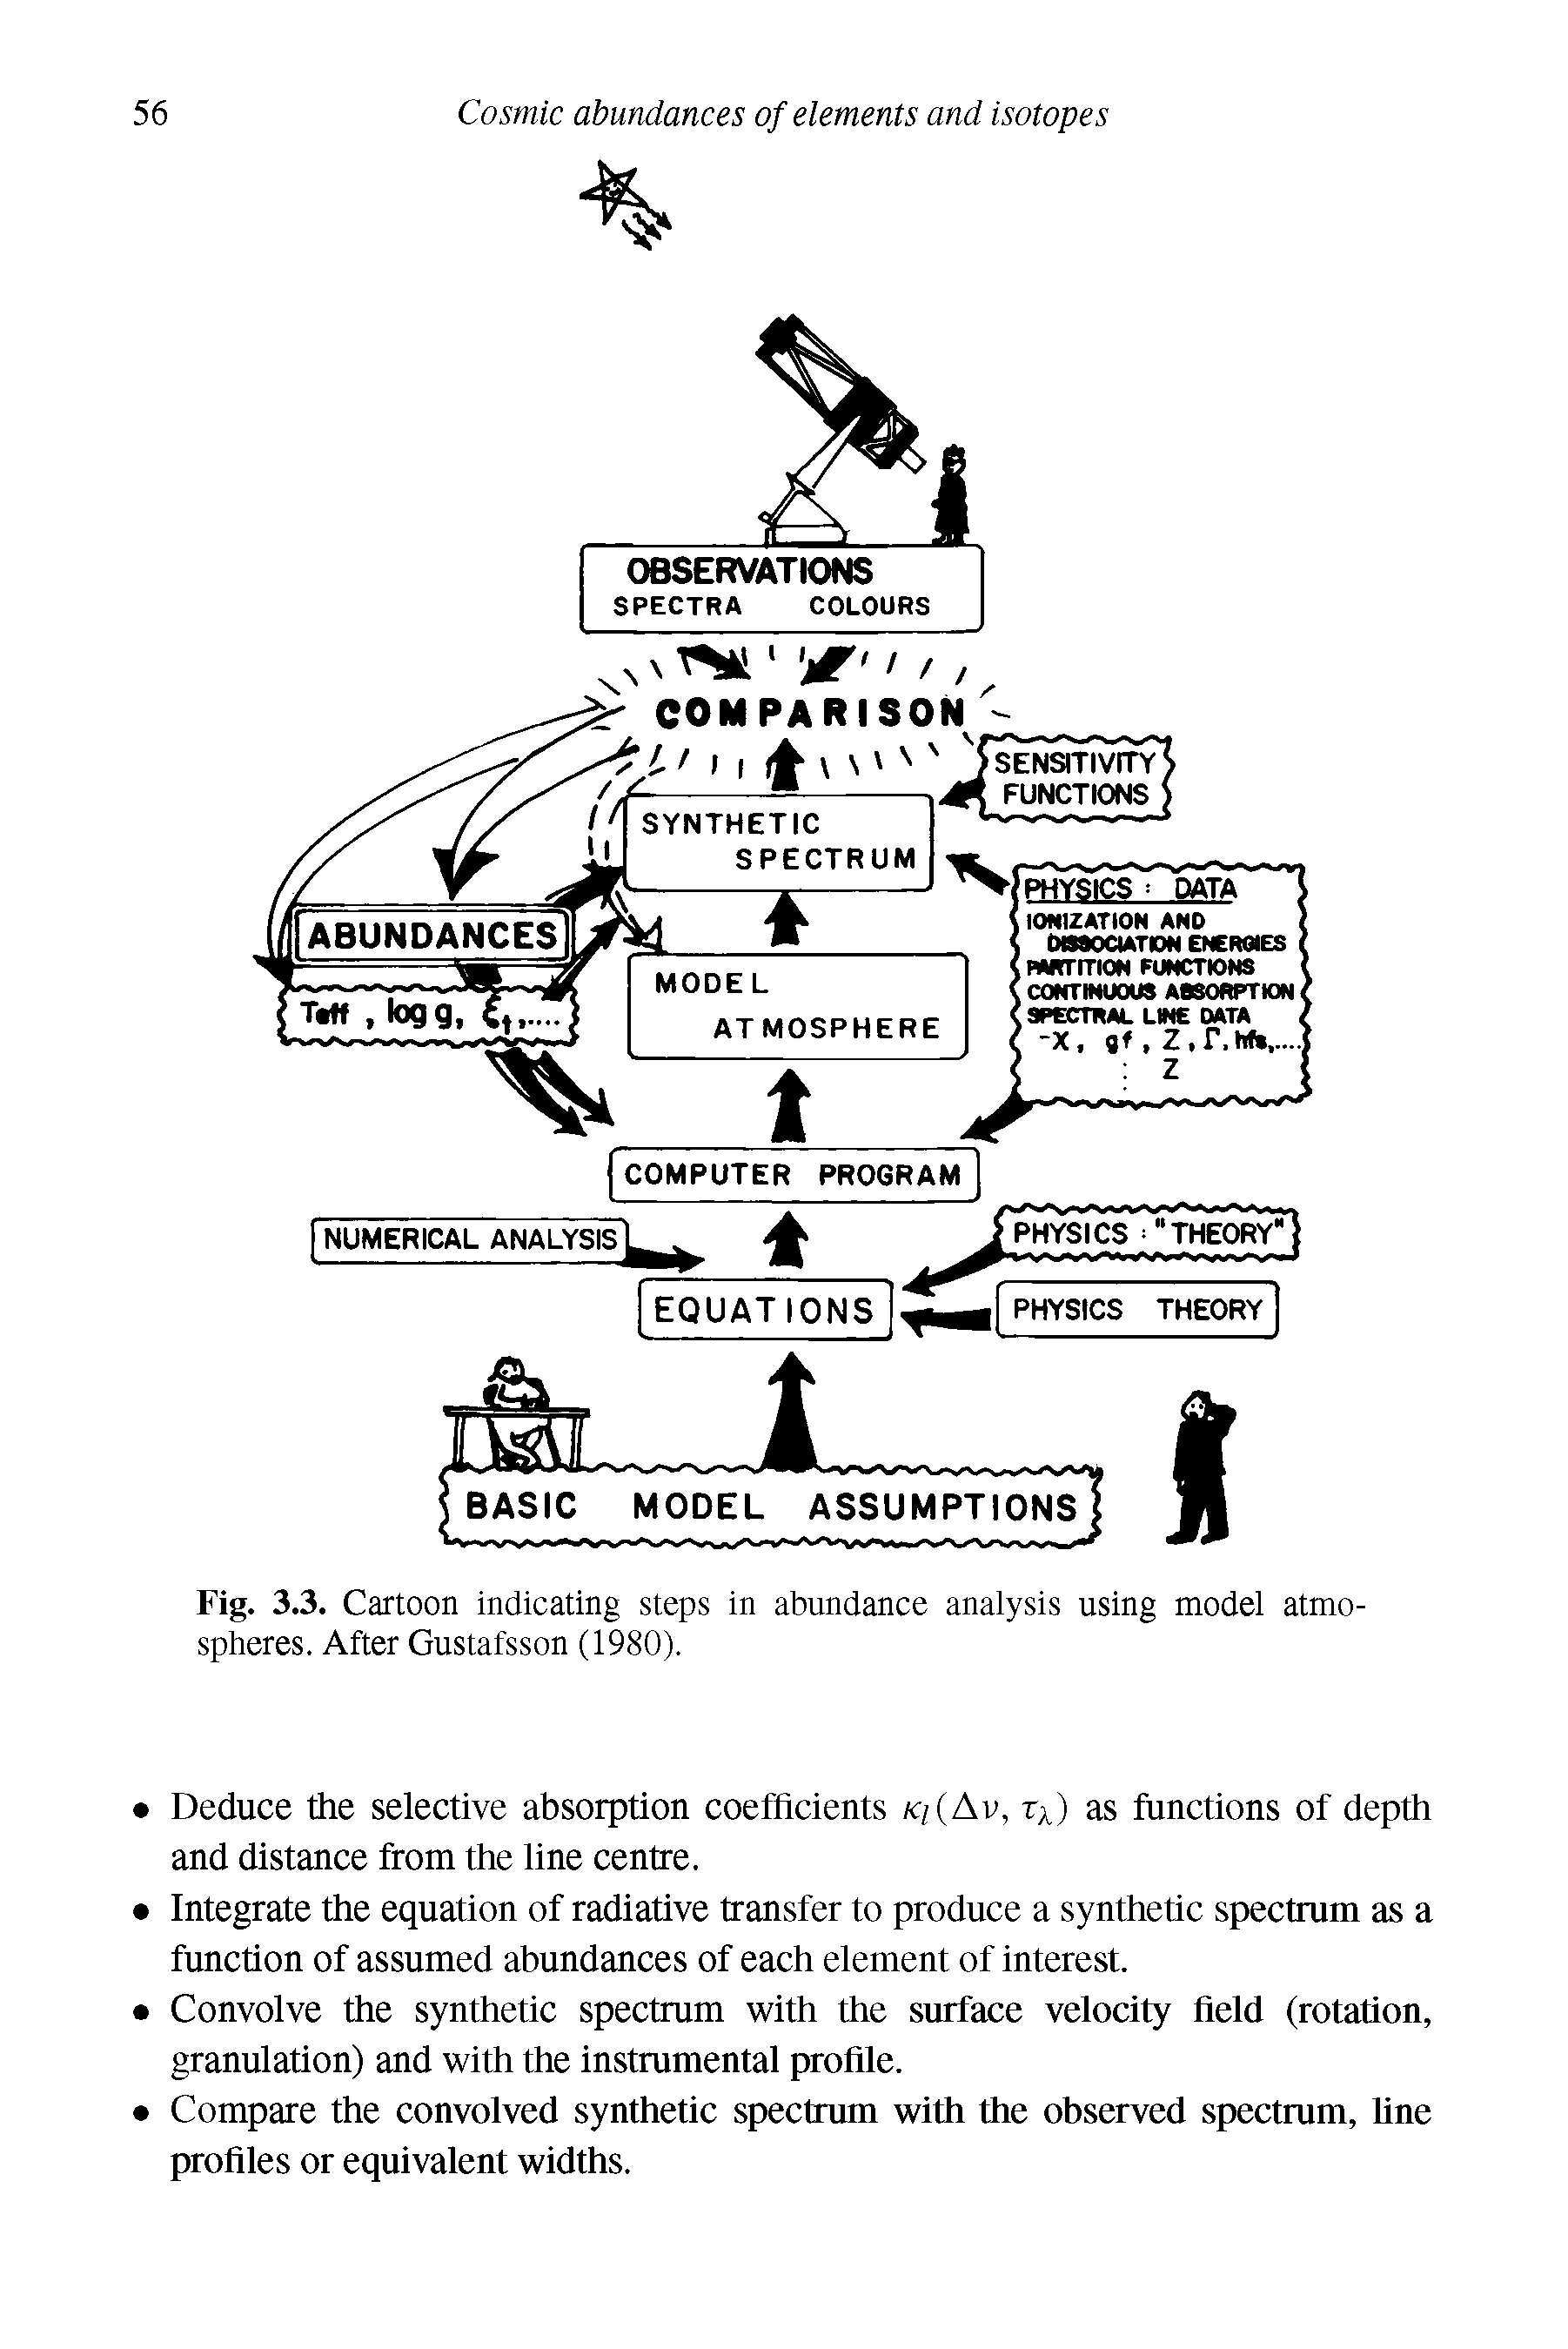 Fig. 3.3. Cartoon indicating steps in abundance analysis using model atmospheres. After Gustafsson (1980).